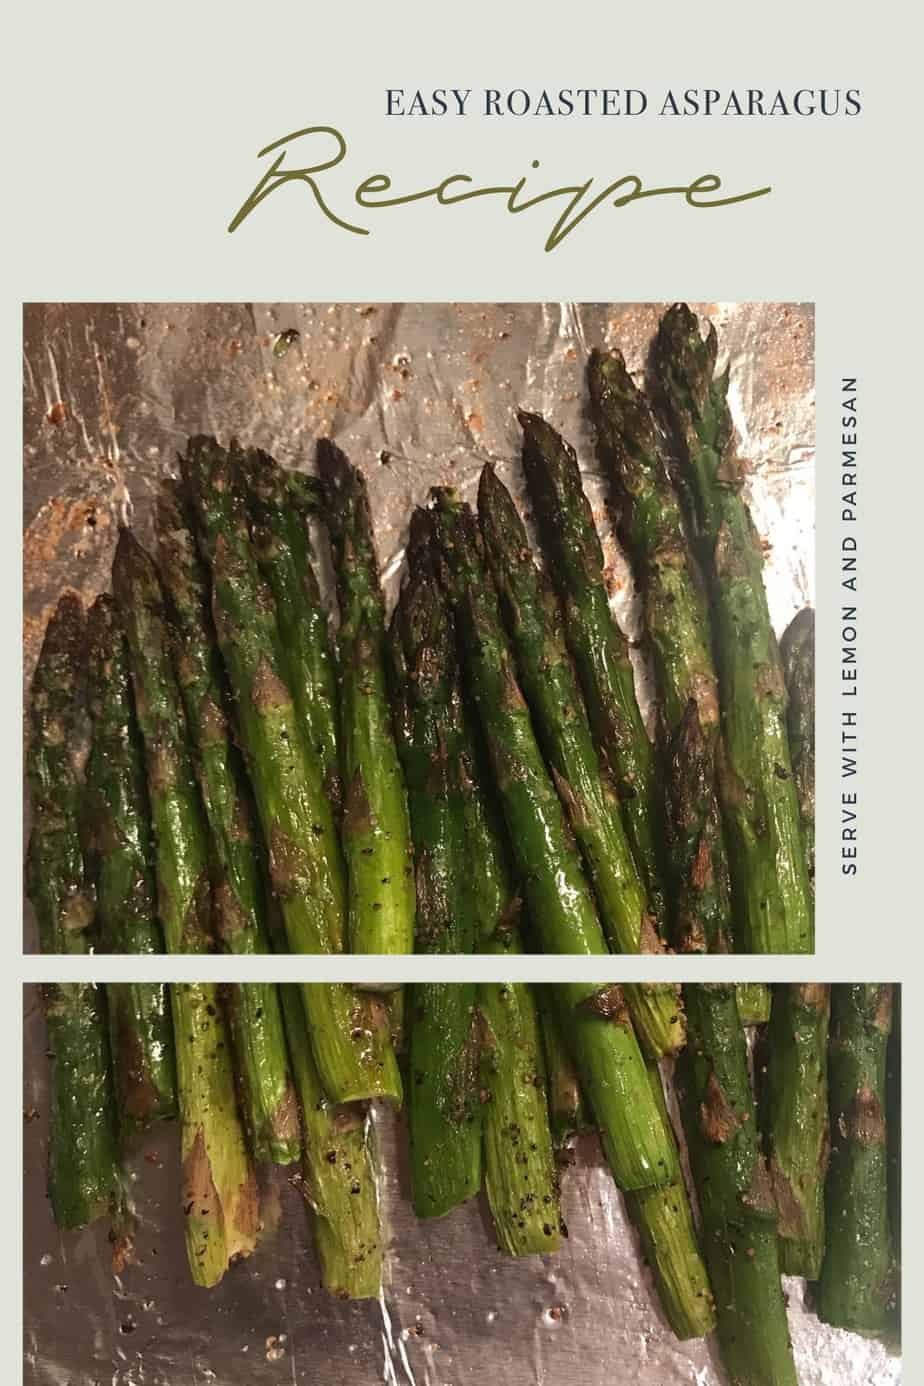 Easy Roasted Asparagus Recipe With Lemon and Parmesan